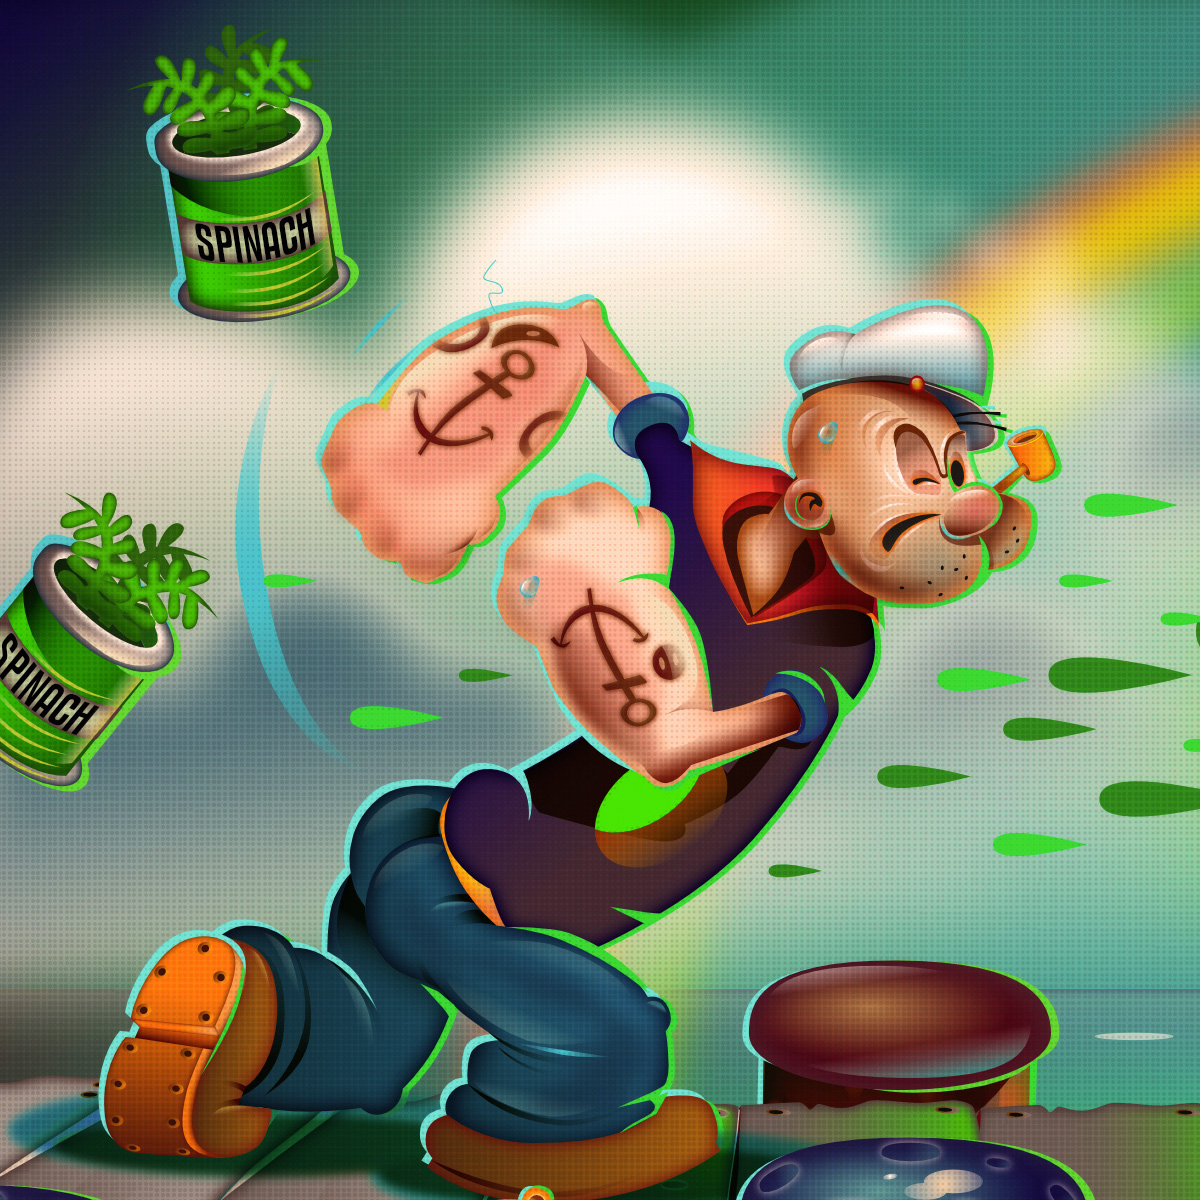 Popeye bluto Streetfighter blender Affinity cats cute Sweets plants